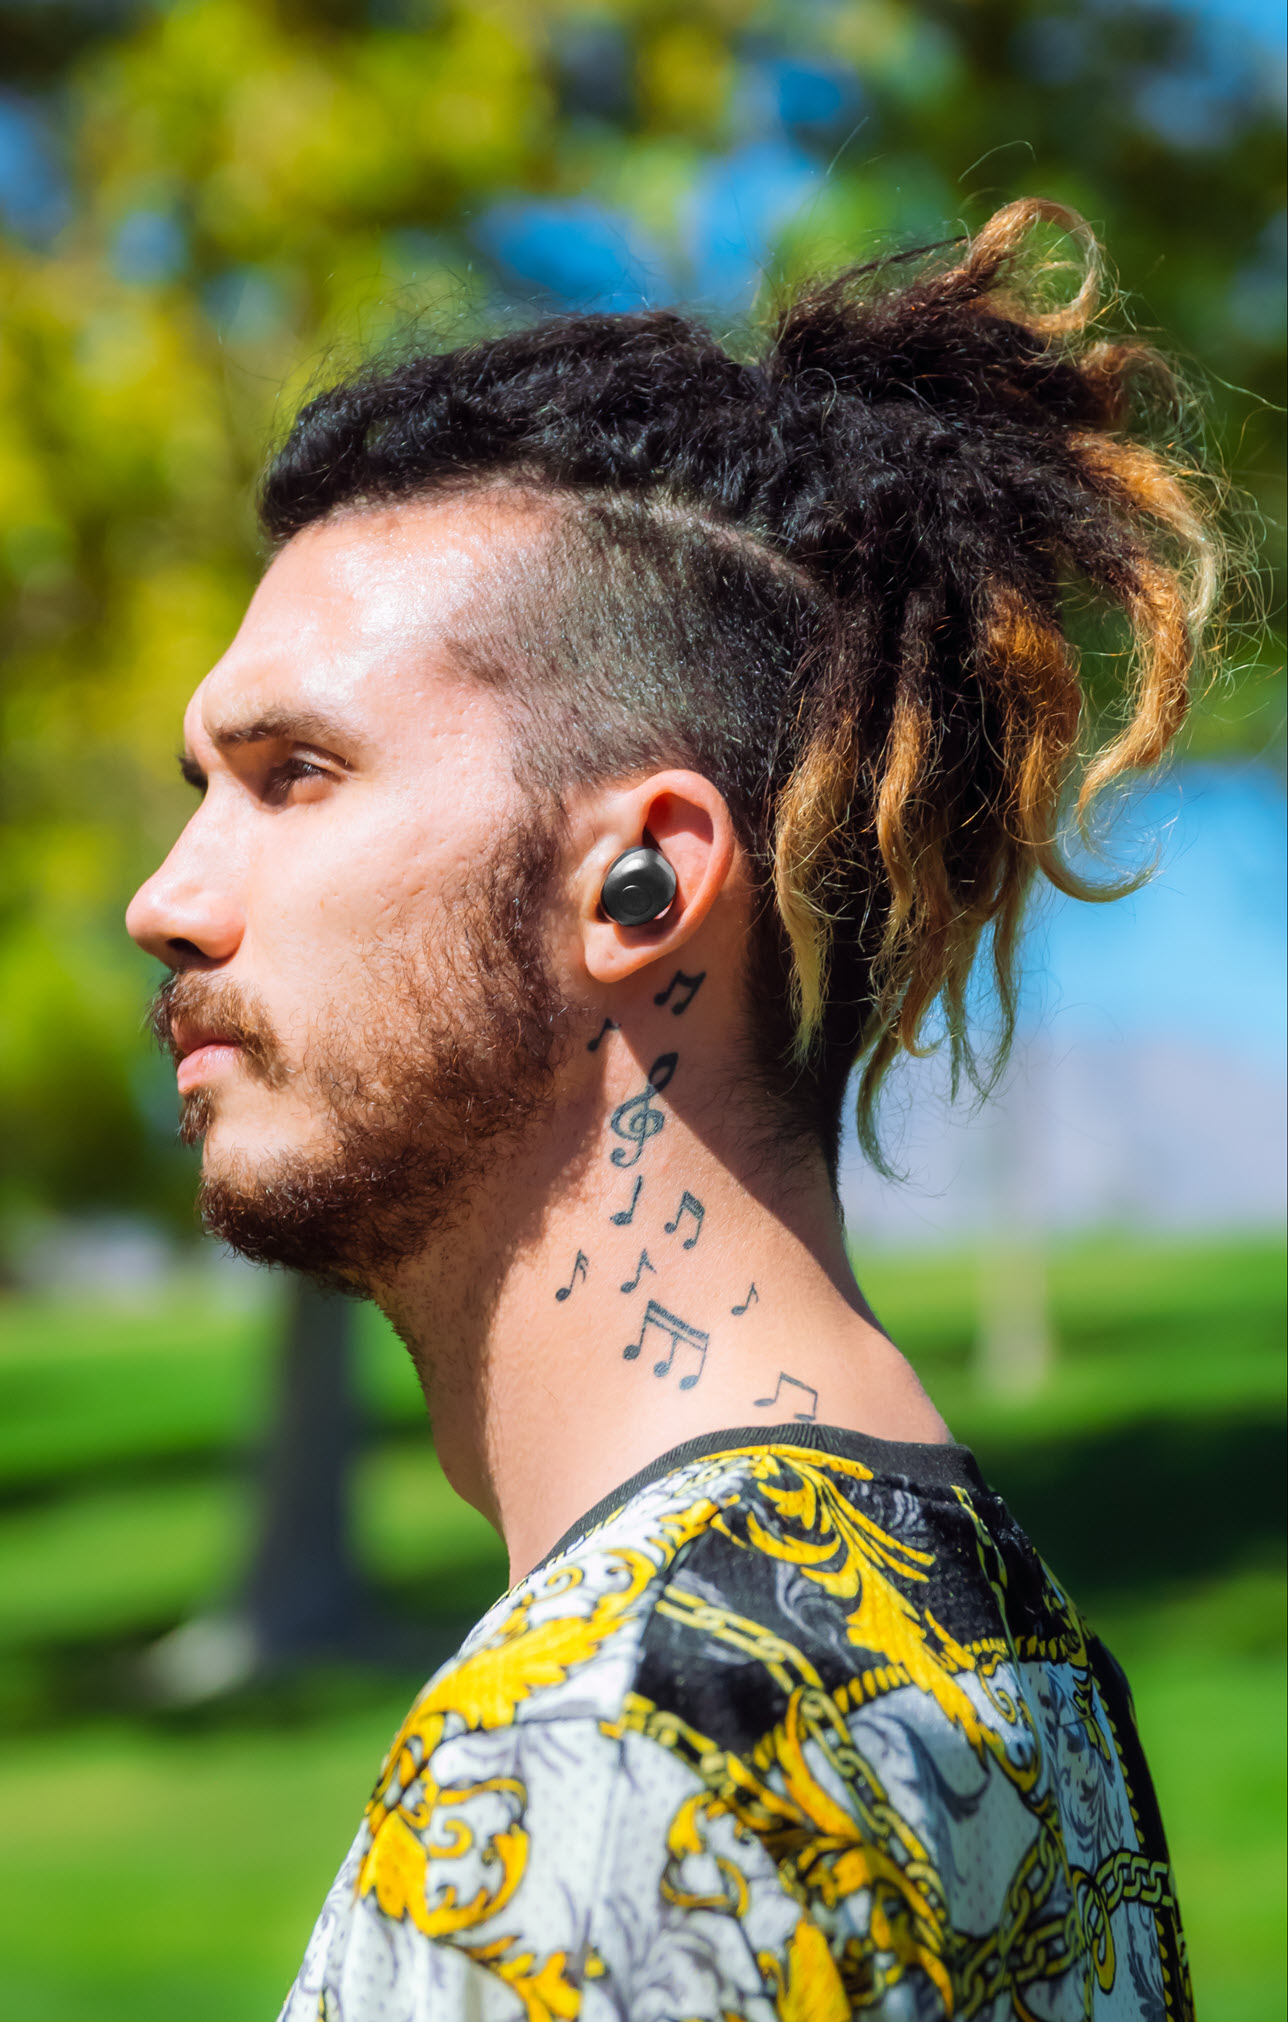 Young man with dreads and body art wearing earbuds. Seen in profile.